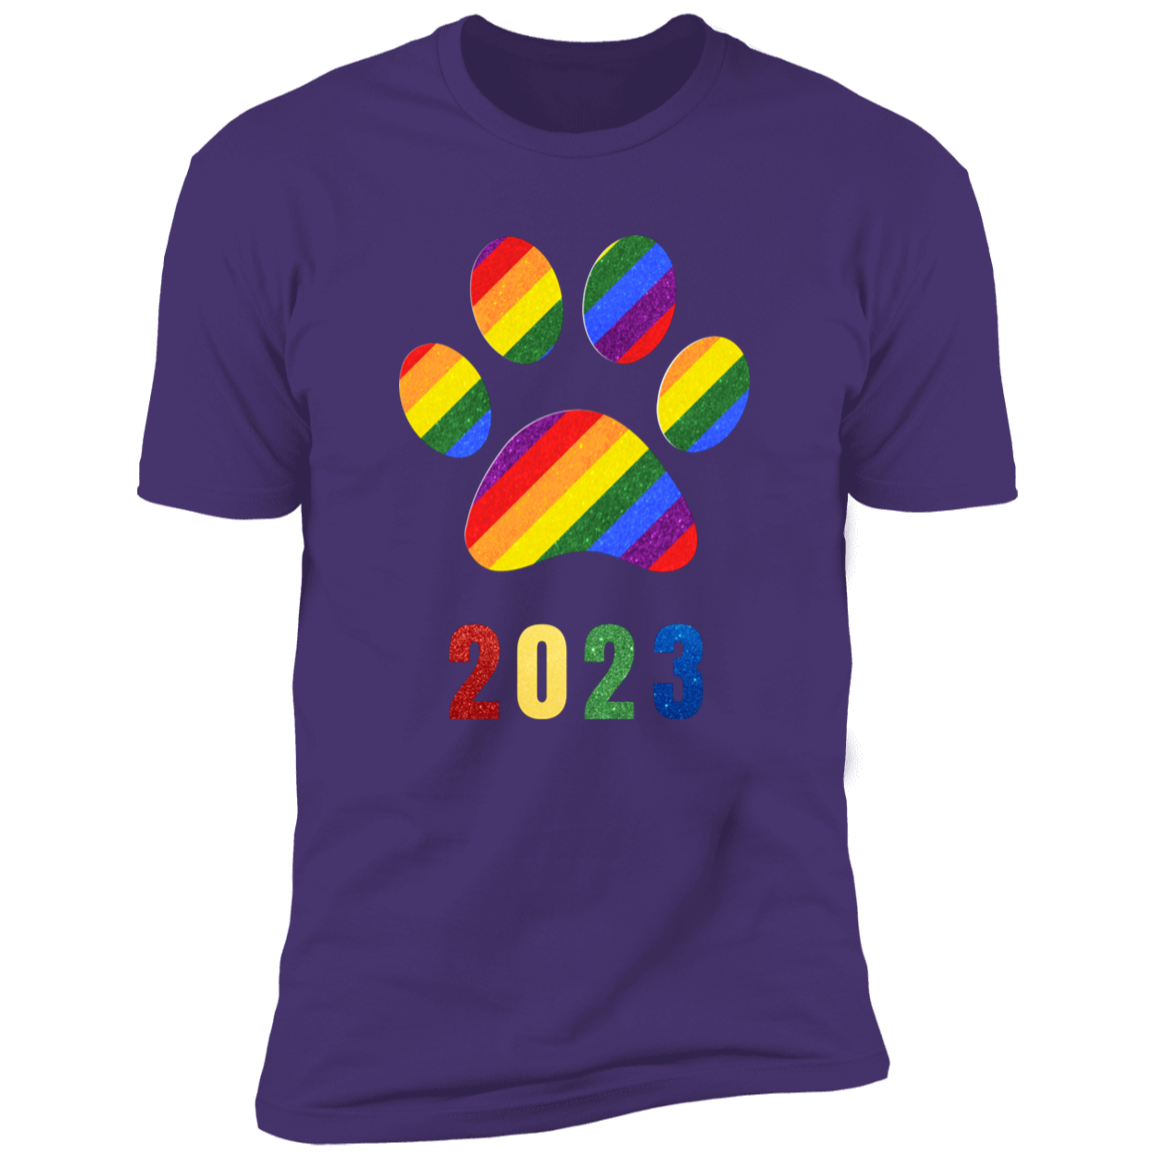 Pride Paw 2023 (Sparkles) Pride T-shirt, Paw Pride Dog Shirt for humans, in purple rush